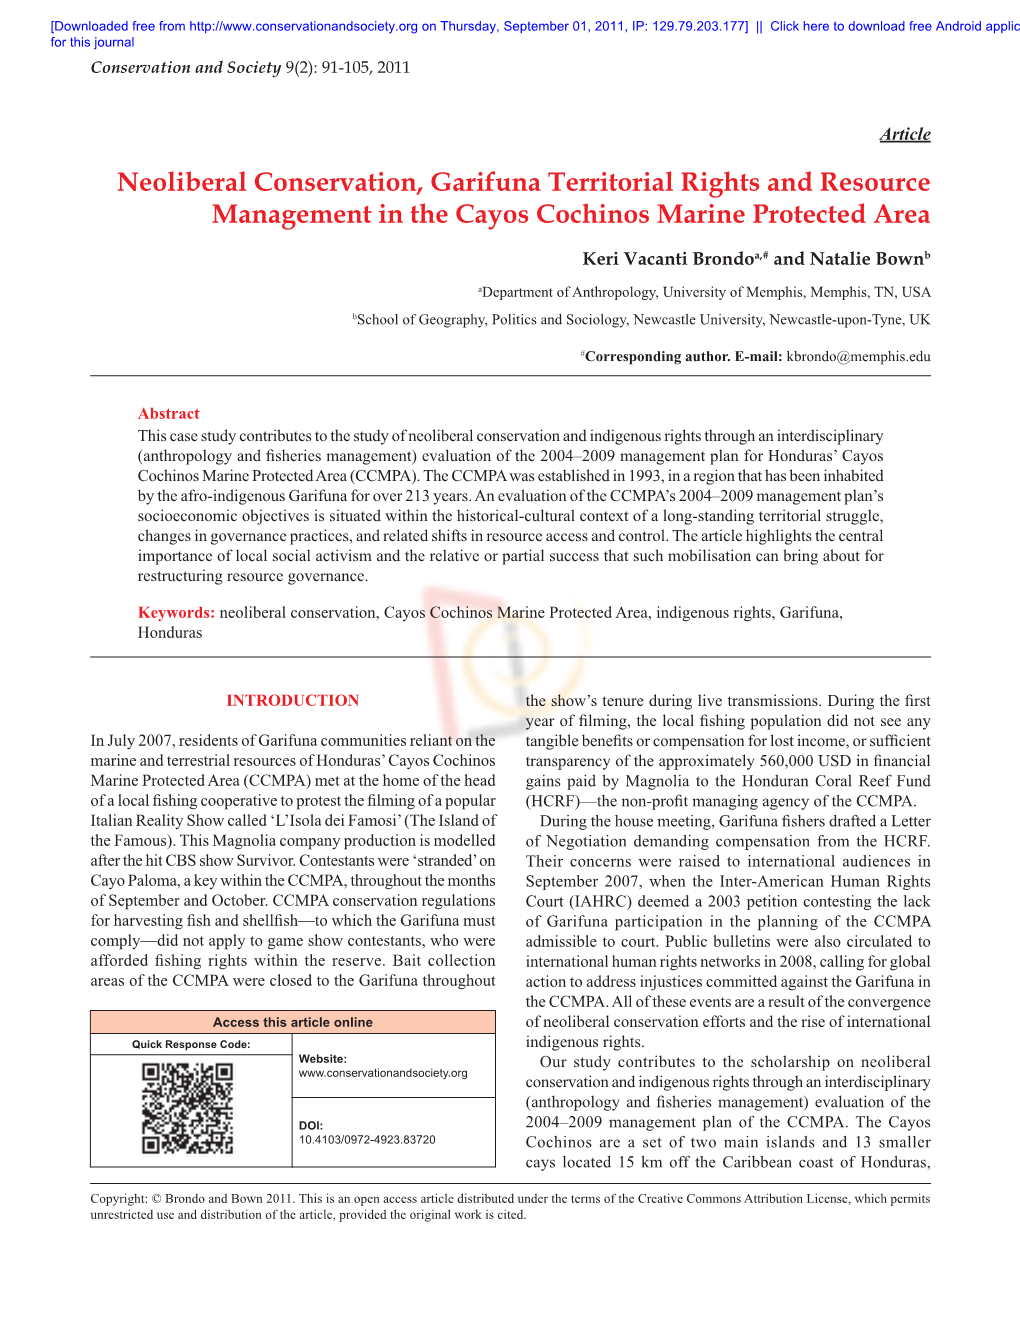 Neoliberal Conservation, Garifuna Territorial Rights and Resource Management in the Cayos Cochinos Marine Protected Area